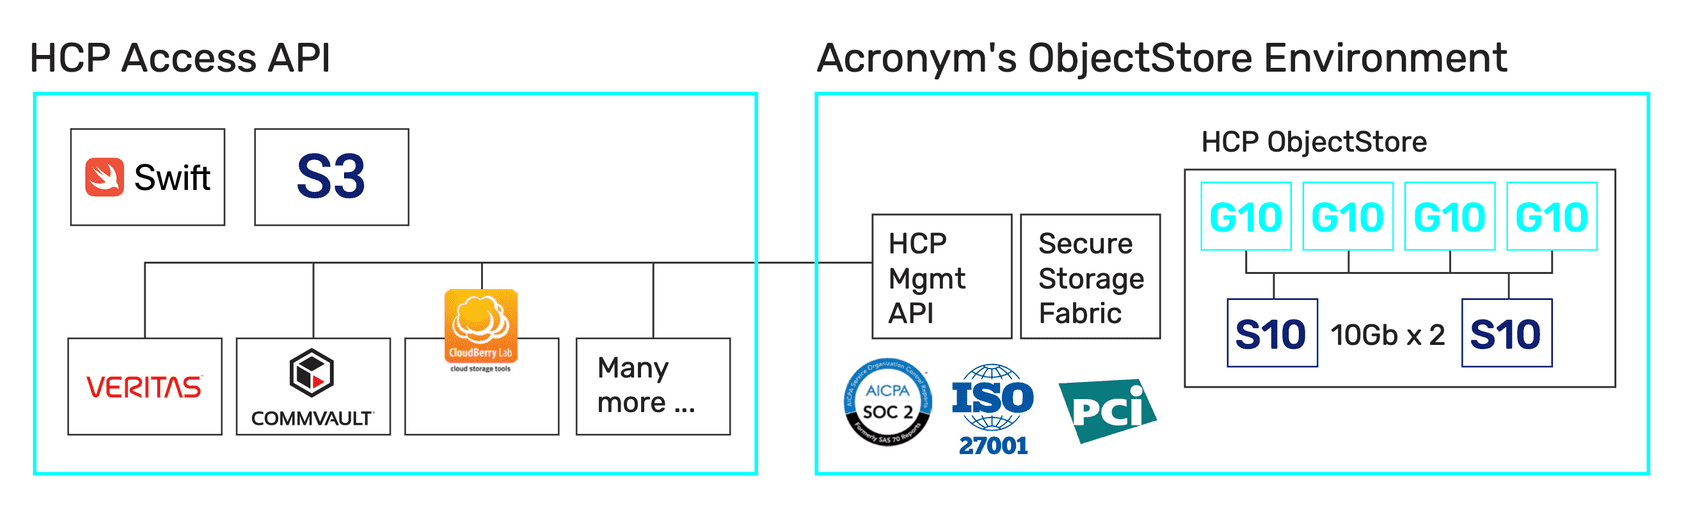 HCP access API & Acronym's Object Store environment